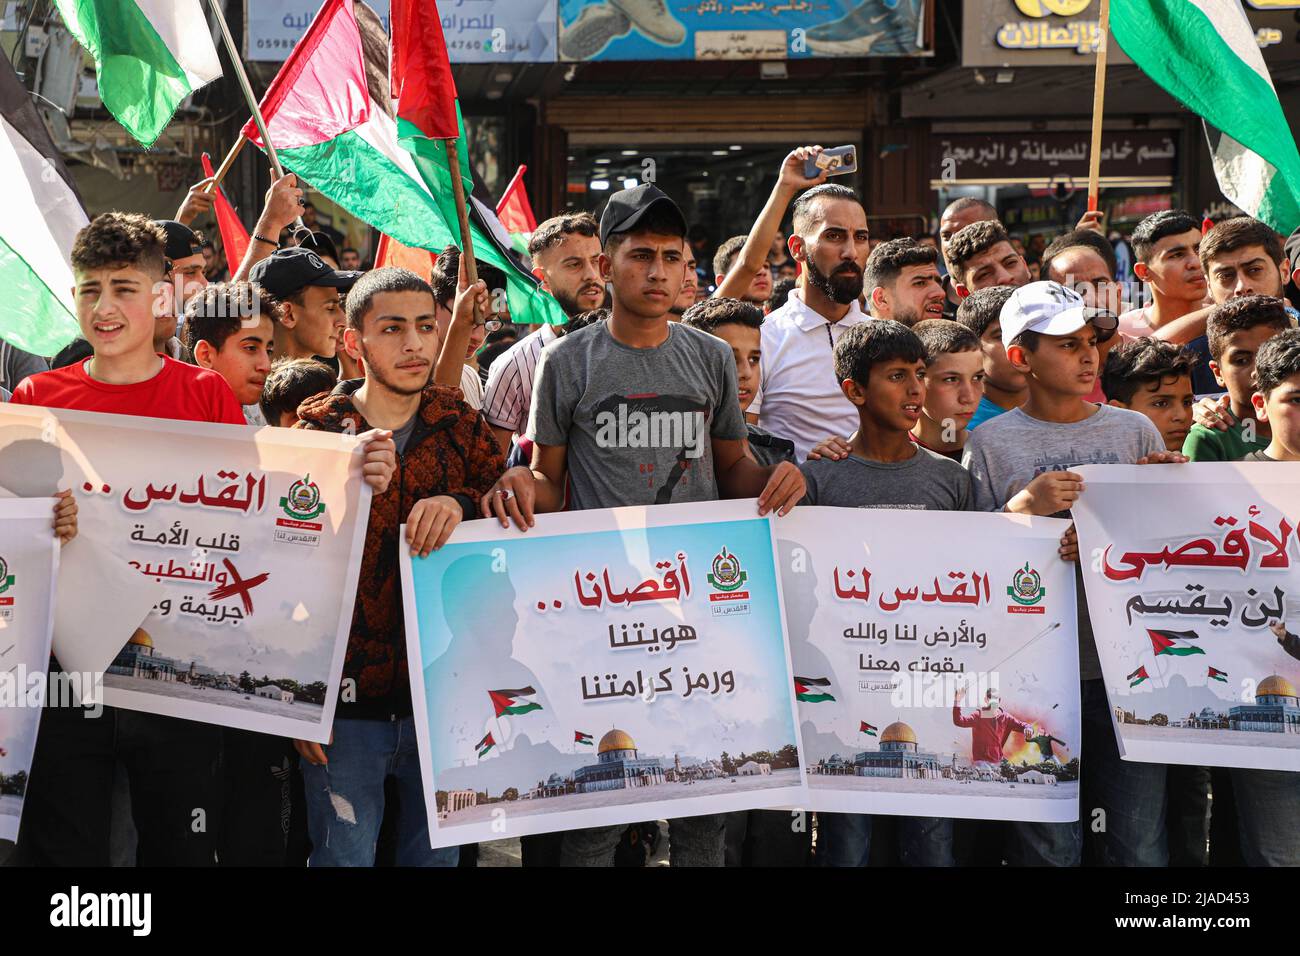 Gaza. 29th May, 2022. Palestinian people protest against the flag march in Jabalia, northern Gaza Strip, on May 29, 2022. Tens of thousands of Palestinians have joined public protests organized in the West Bank and the Gaza Strip against the flag march on Sunday. The controversial flag march through Jerusalem's Old City took place on Sunday to mark Jerusalem Day, which commemorates the unification of the city after Israel annexed East Jerusalem in 1967. Credit: Rizek Abdeljawad/Xinhua/Alamy Live News Stock Photo